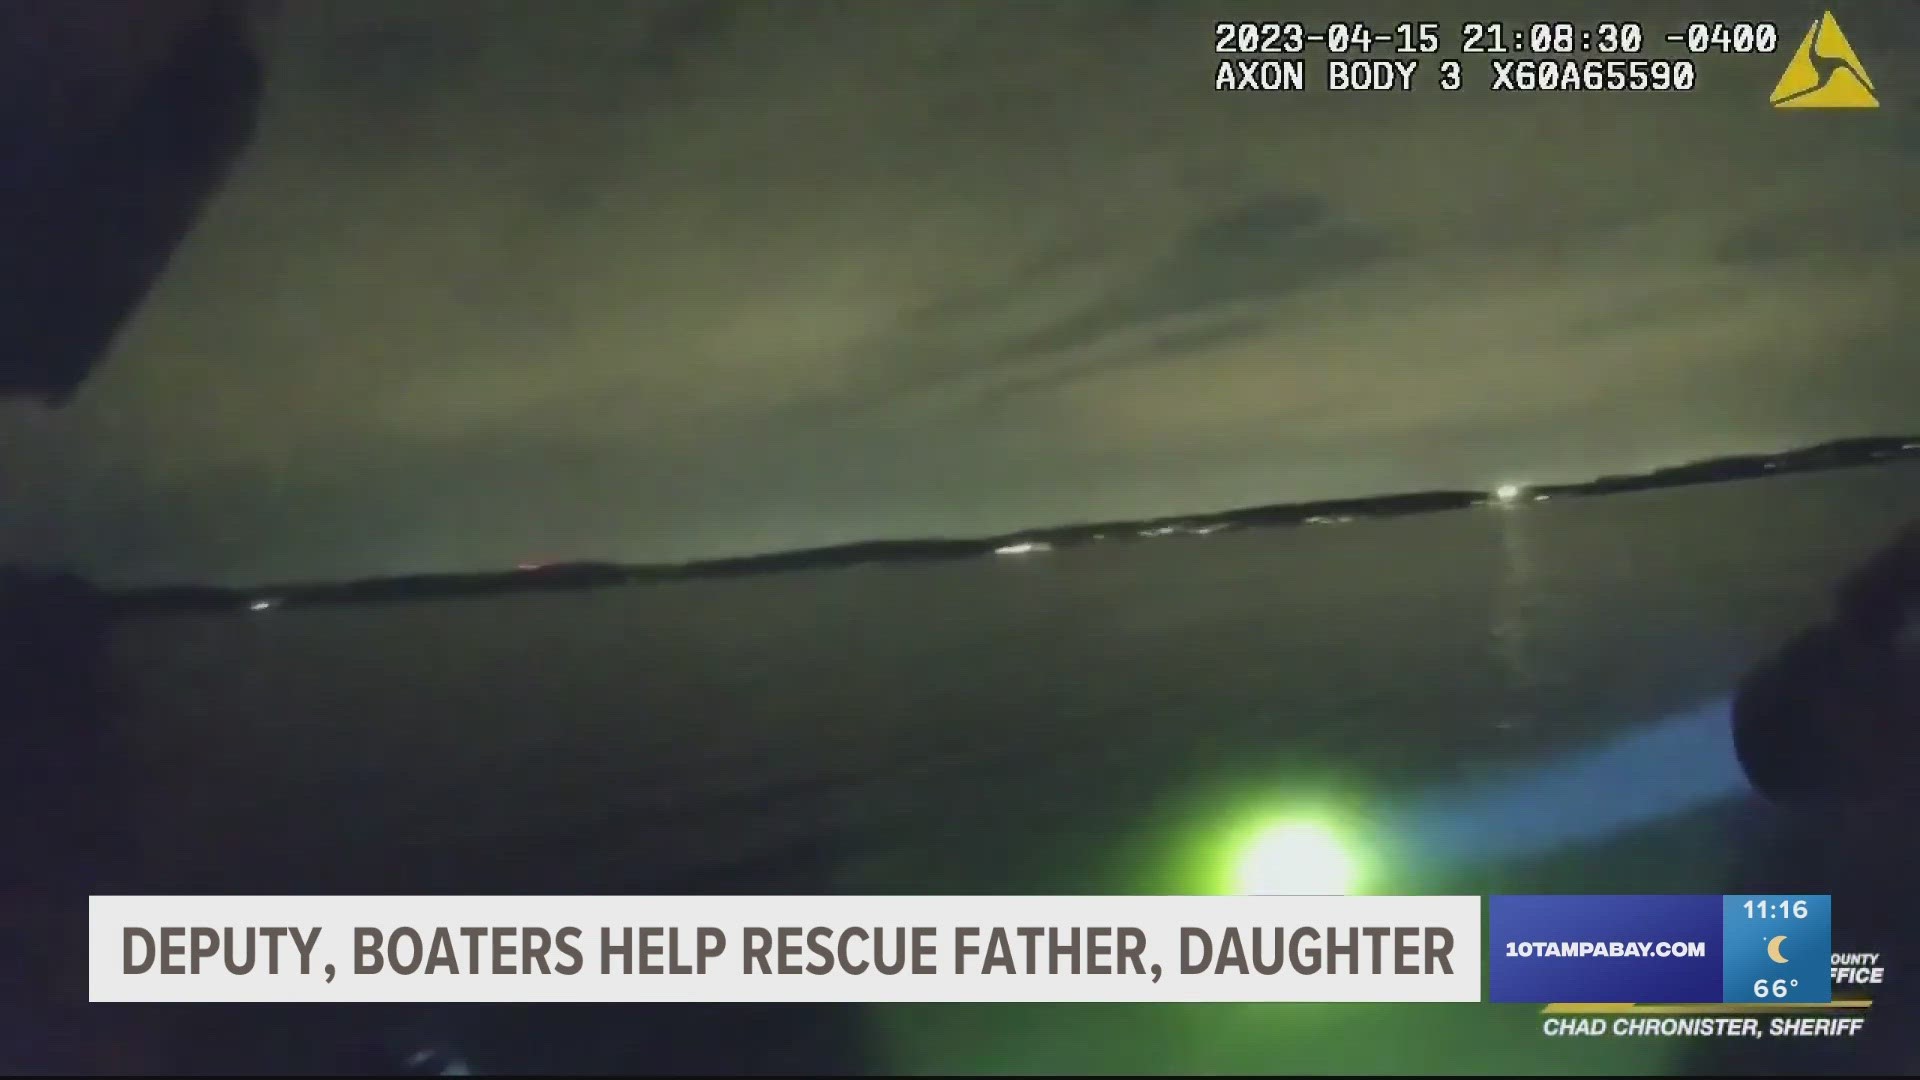 In a video from the sheriff's office, the deputy was able to spot the father and daughter a short distance away yelling for help.